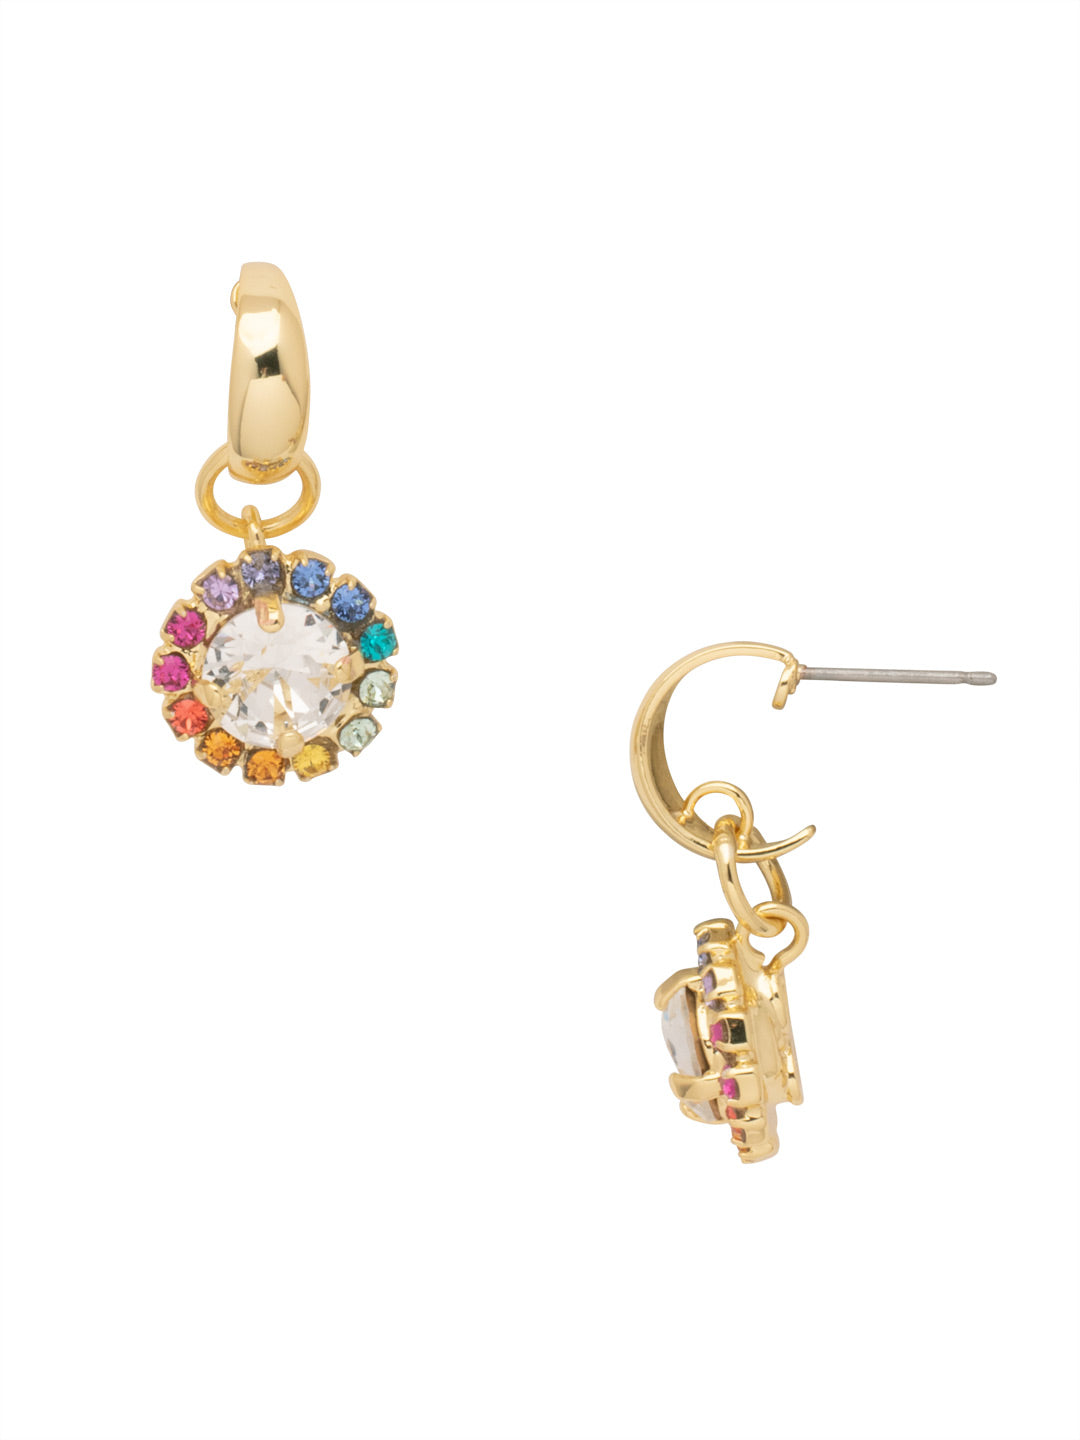 Haute Halo Huggie Dangle Earrings - 8EA2BGPRI - <p>The Haute Halo Huggie Dangle Earrings feature a round halo crystal dangling from a huggie hoop on a post. From Sorrelli's Prism collection in our Bright Gold-tone finish.</p>